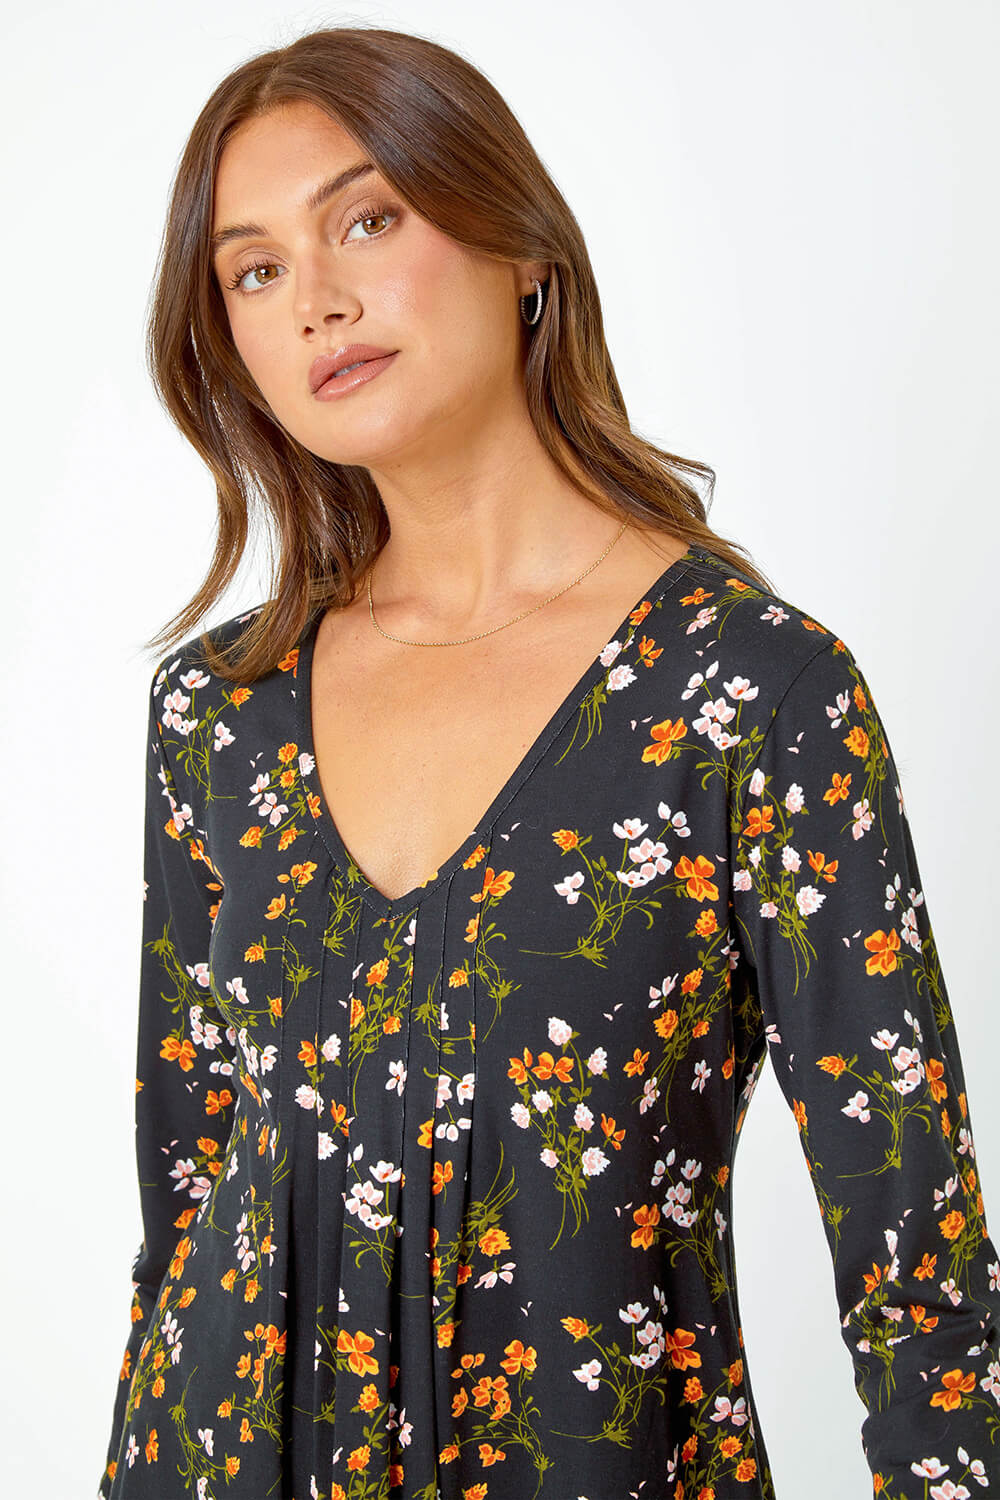 Black Floral Print Swing Stretch Top, Image 4 of 5